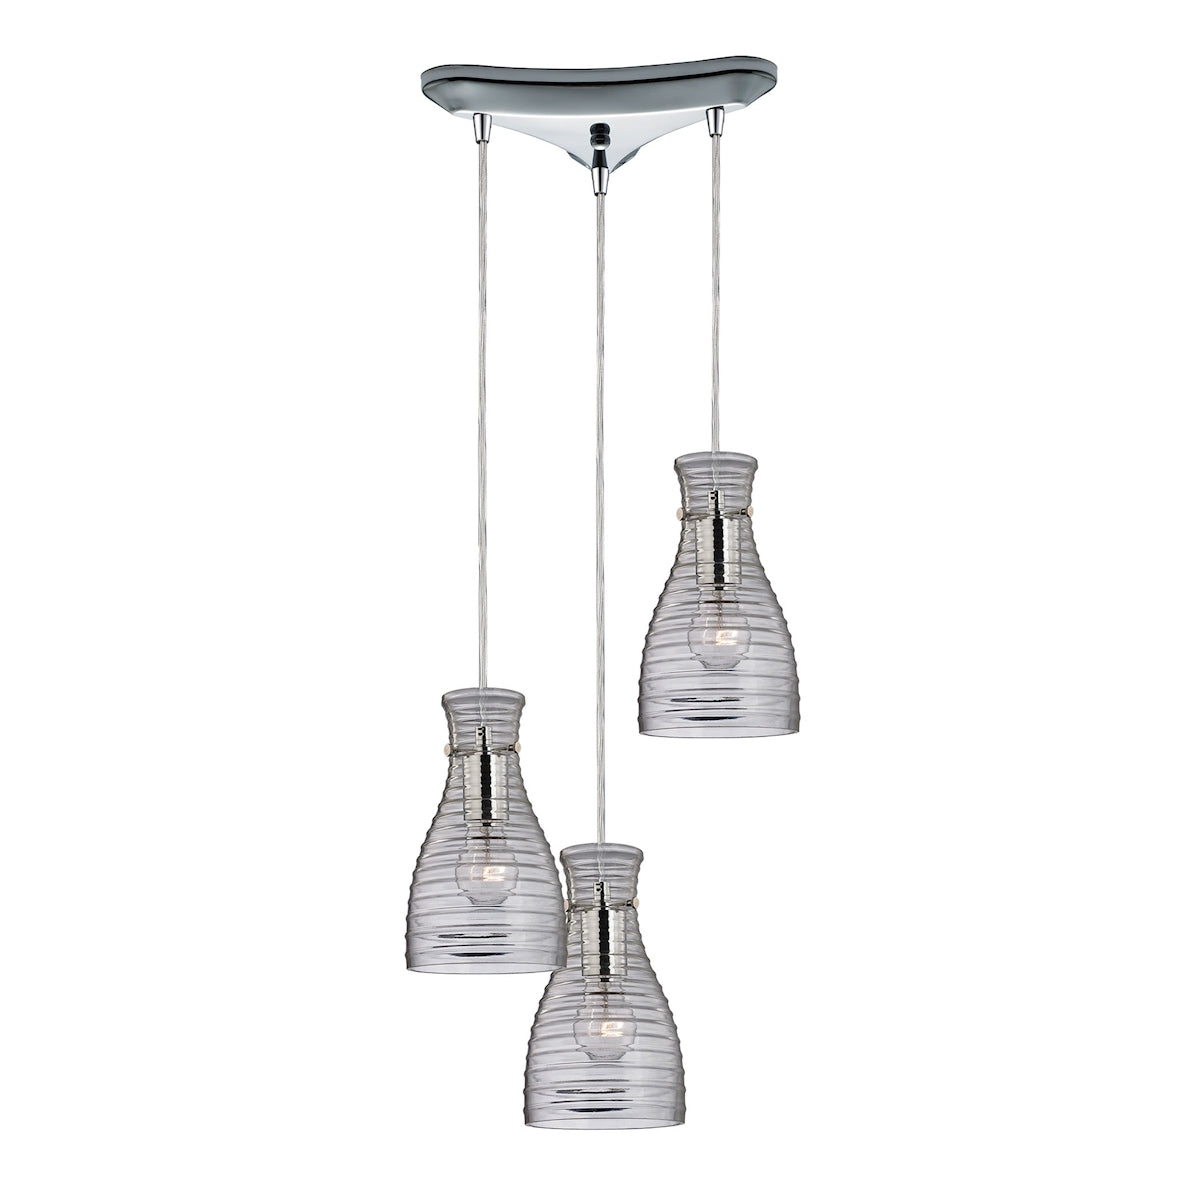 ELK Lighting 46107/3 Strata 3-Light Triangular Pendant Fixture in Polished Chrome with Ribbed Blown Glass